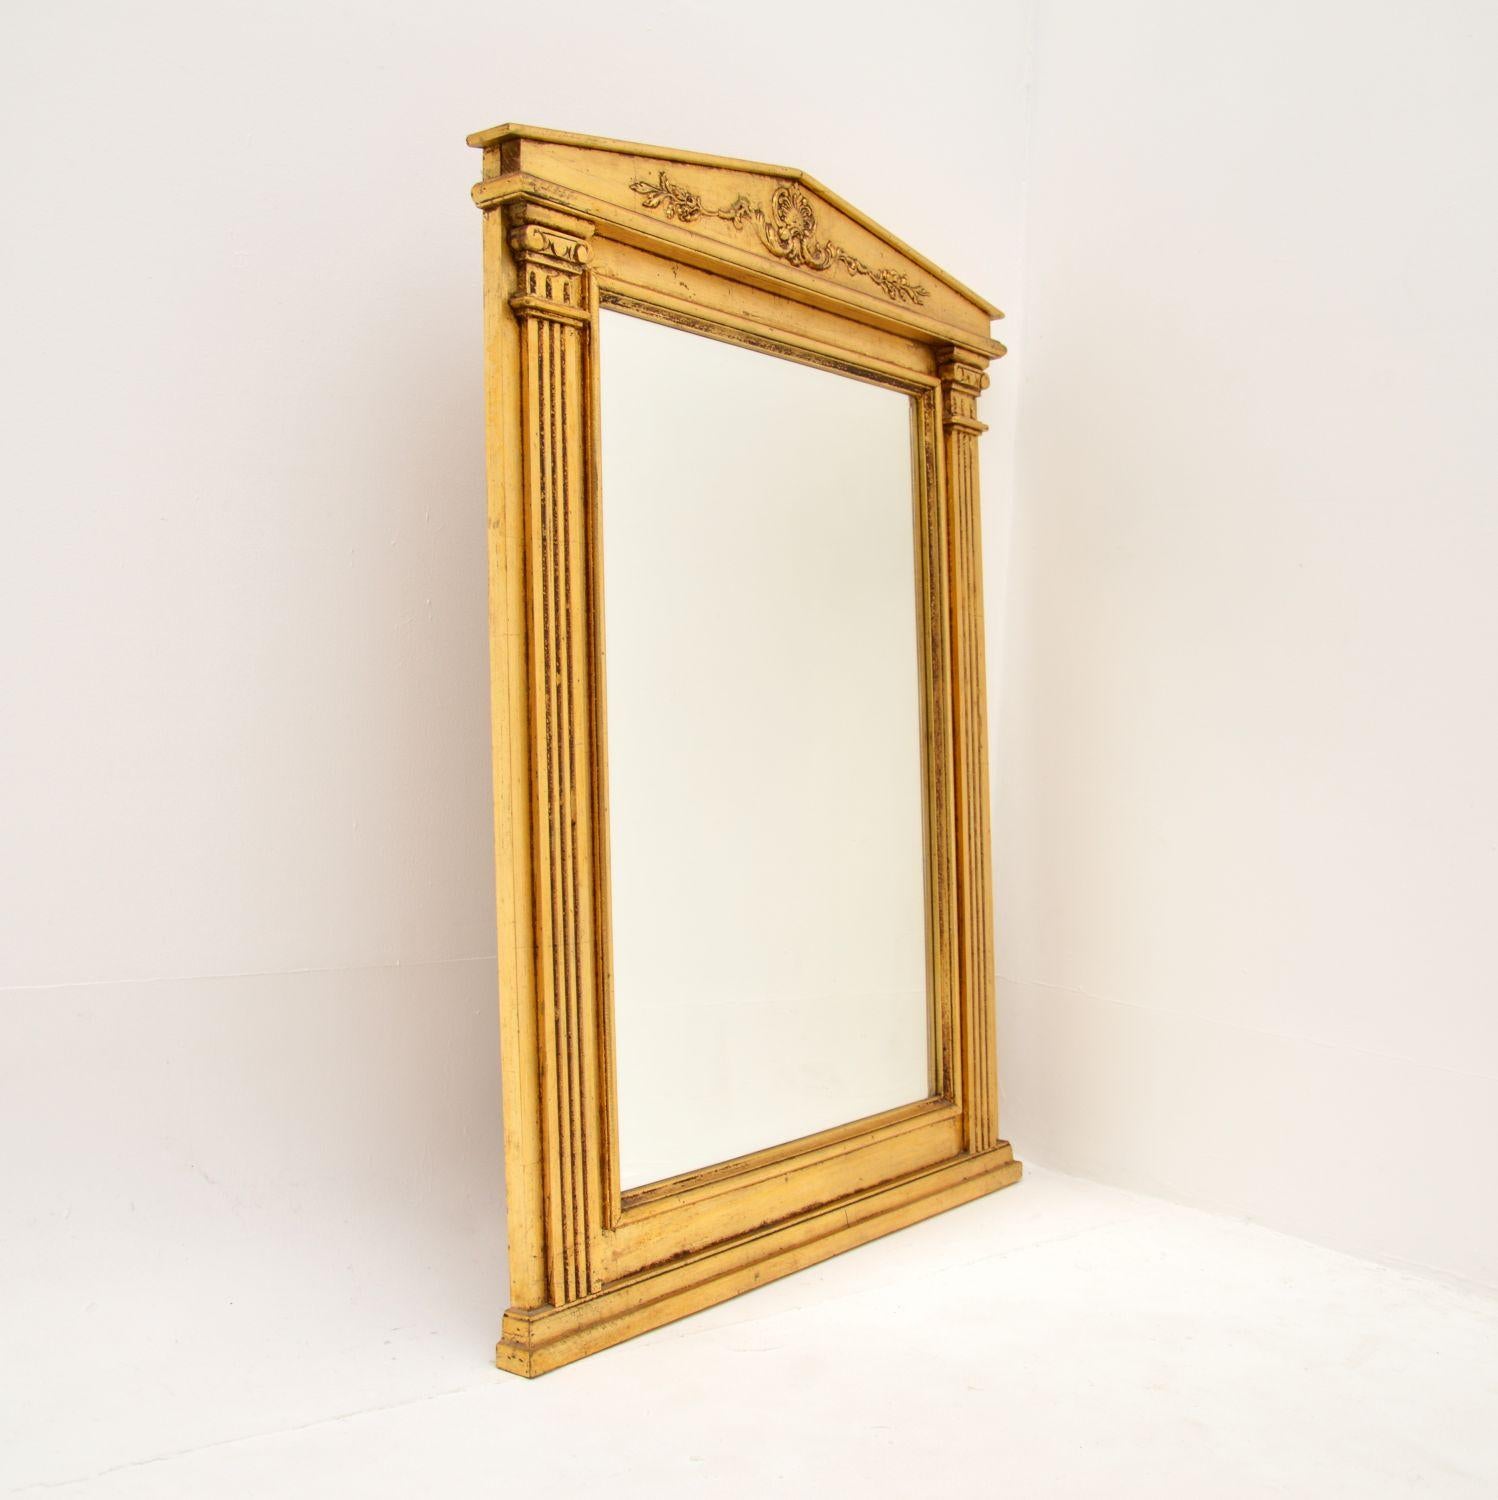 A beautiful antique Italian neo classical gilt wood mirror. This was made in Italy, it dates from around the 1930-50’s.

It is of superb quality and is a great size, quite large and impressive with beveled glass. There are Corinthian column sides,